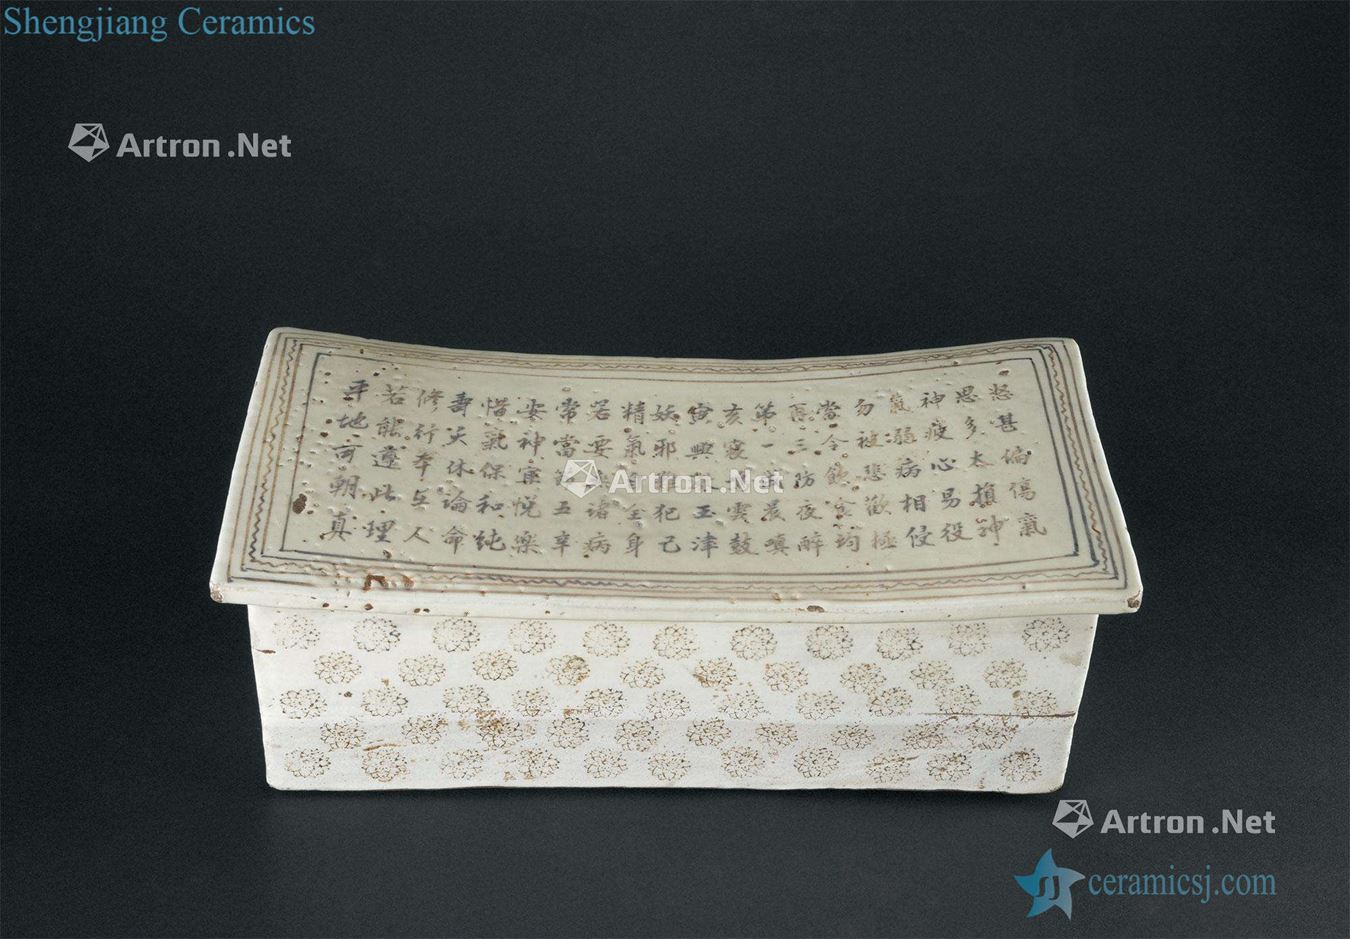 The yuan dynasty (1271-1368) magnetic state kiln poetry pillow